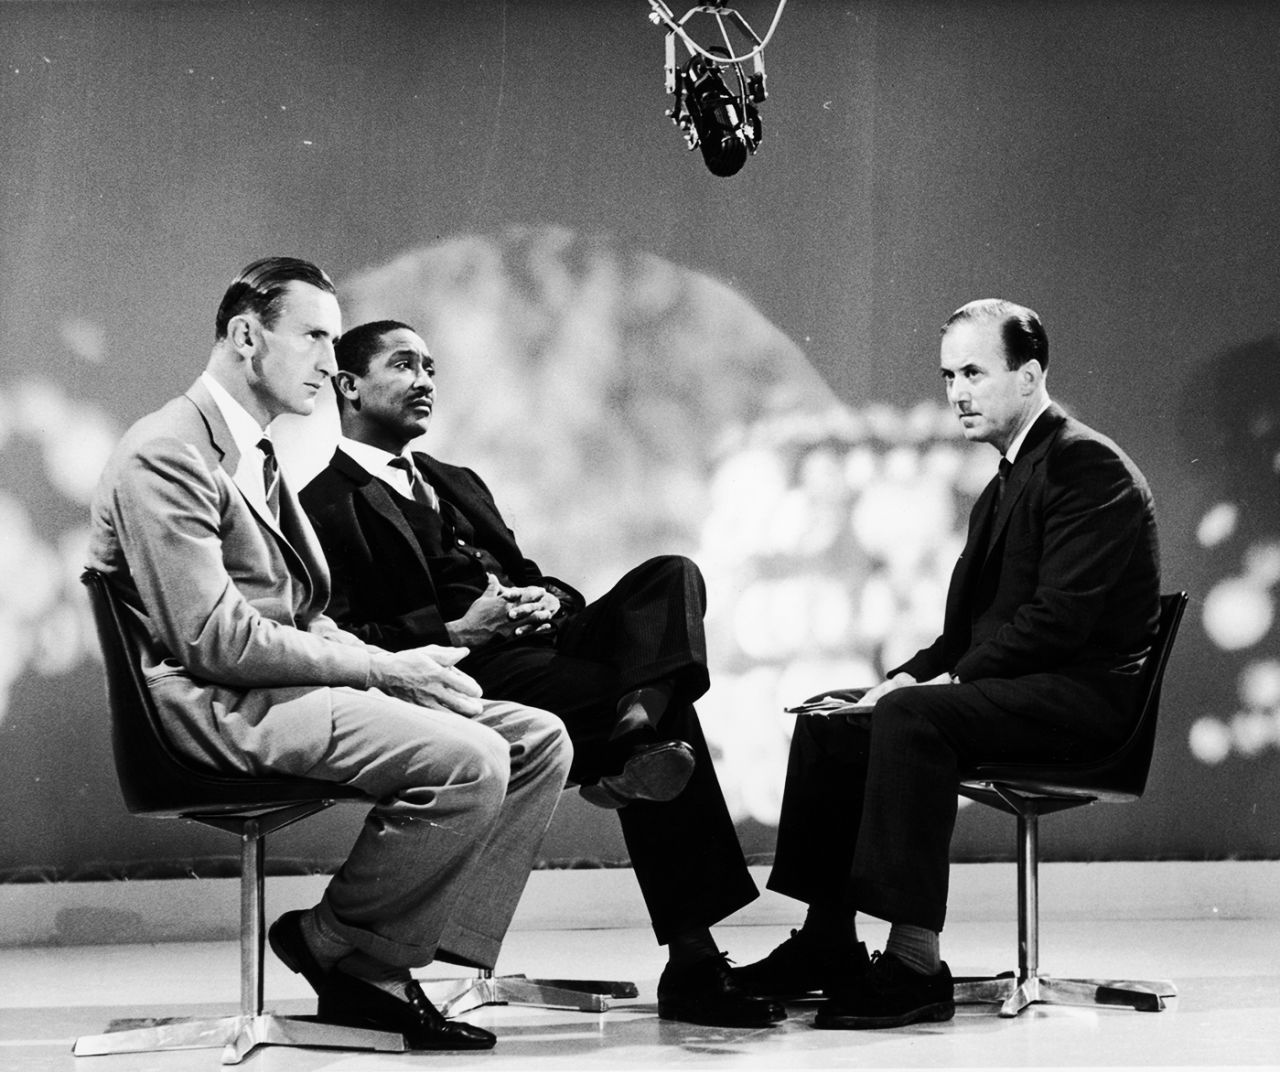 Ted Dexter and Frank Worrell, England and West Indies' captains, attend an interview with the BBC's Peter West, August 27, 1963